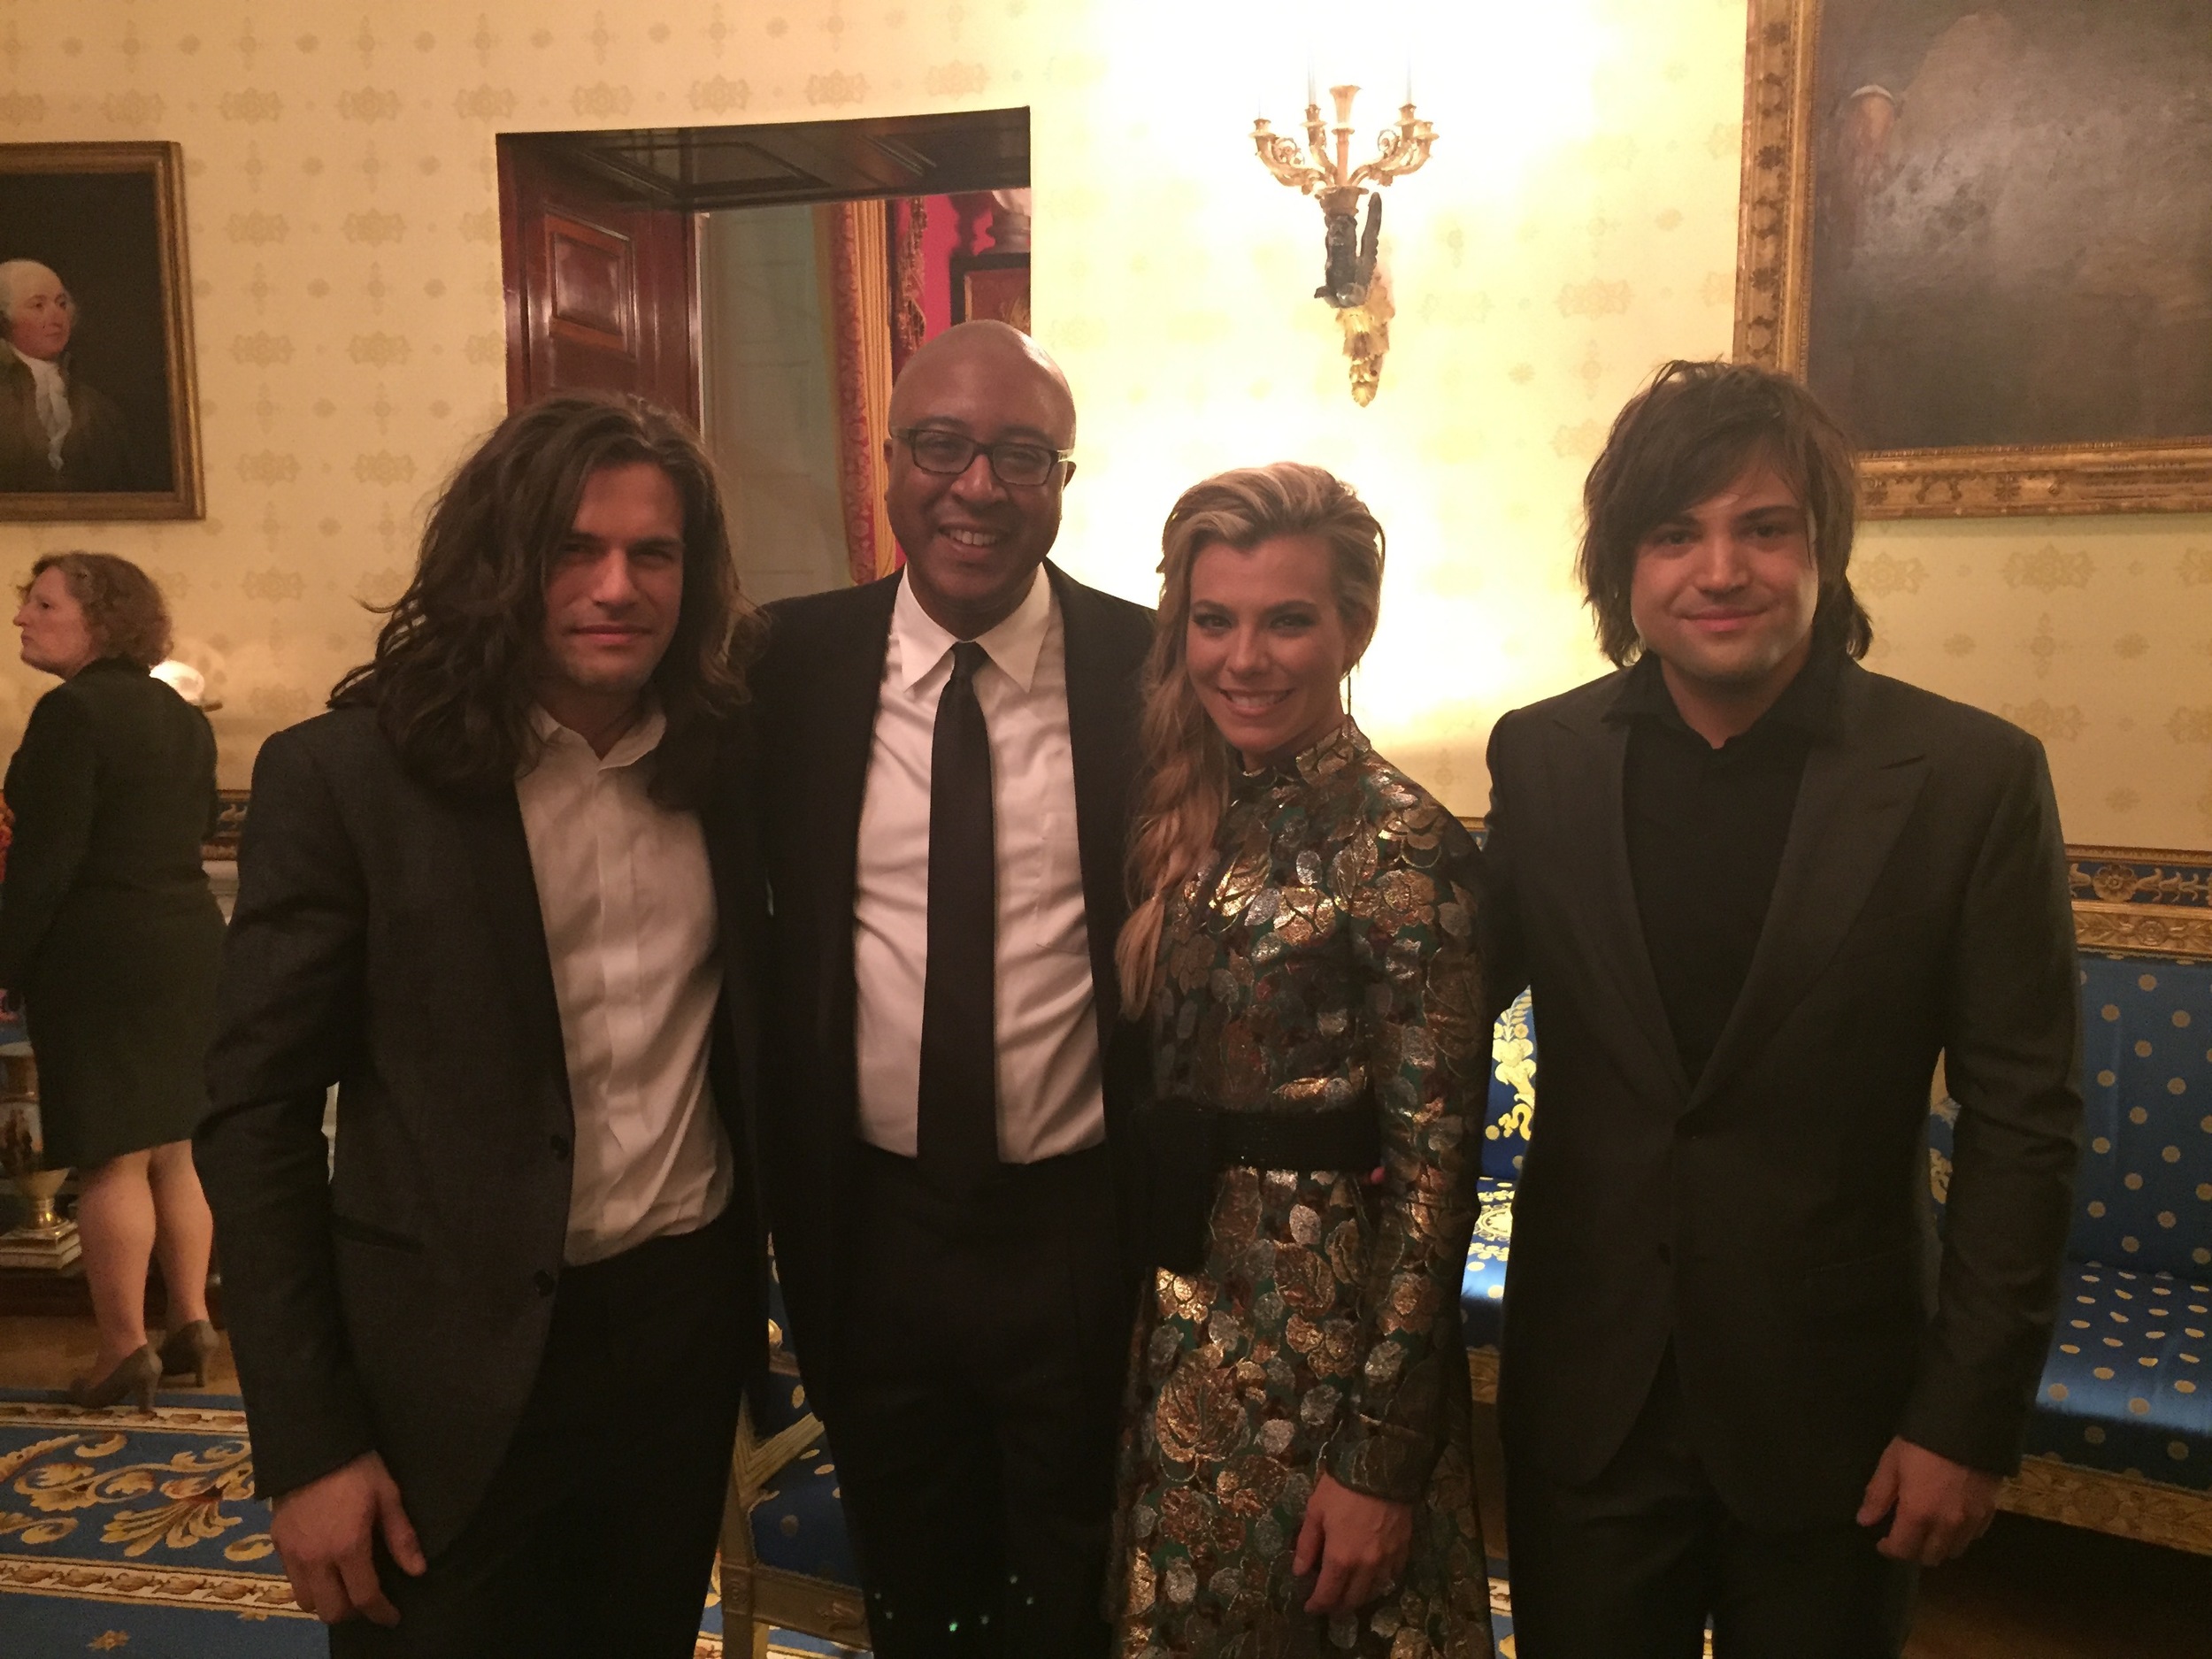 With The Band Perry